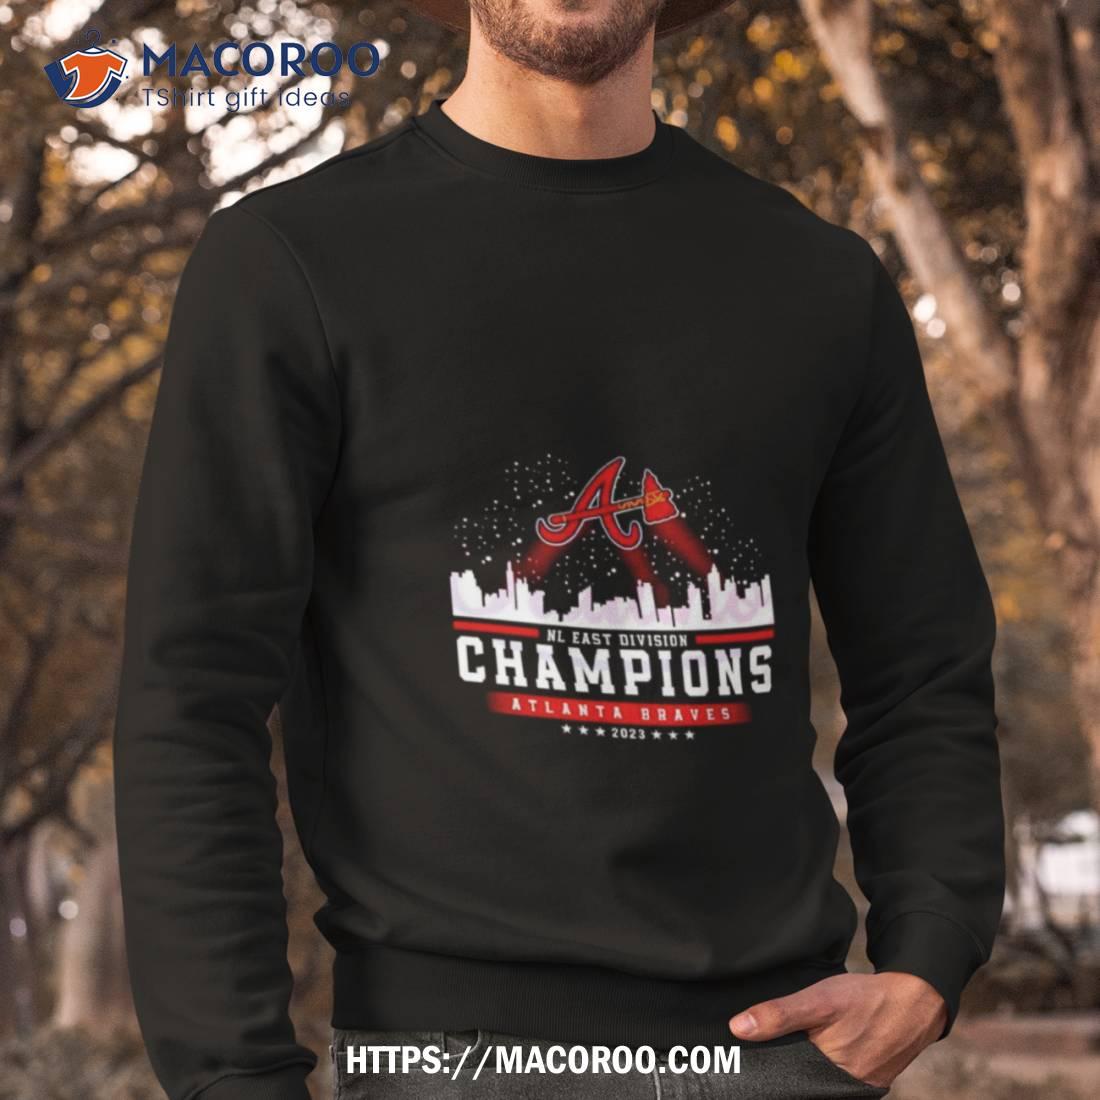 Atlanta Braves Are 2023 Nl East Champions For The A Shirt